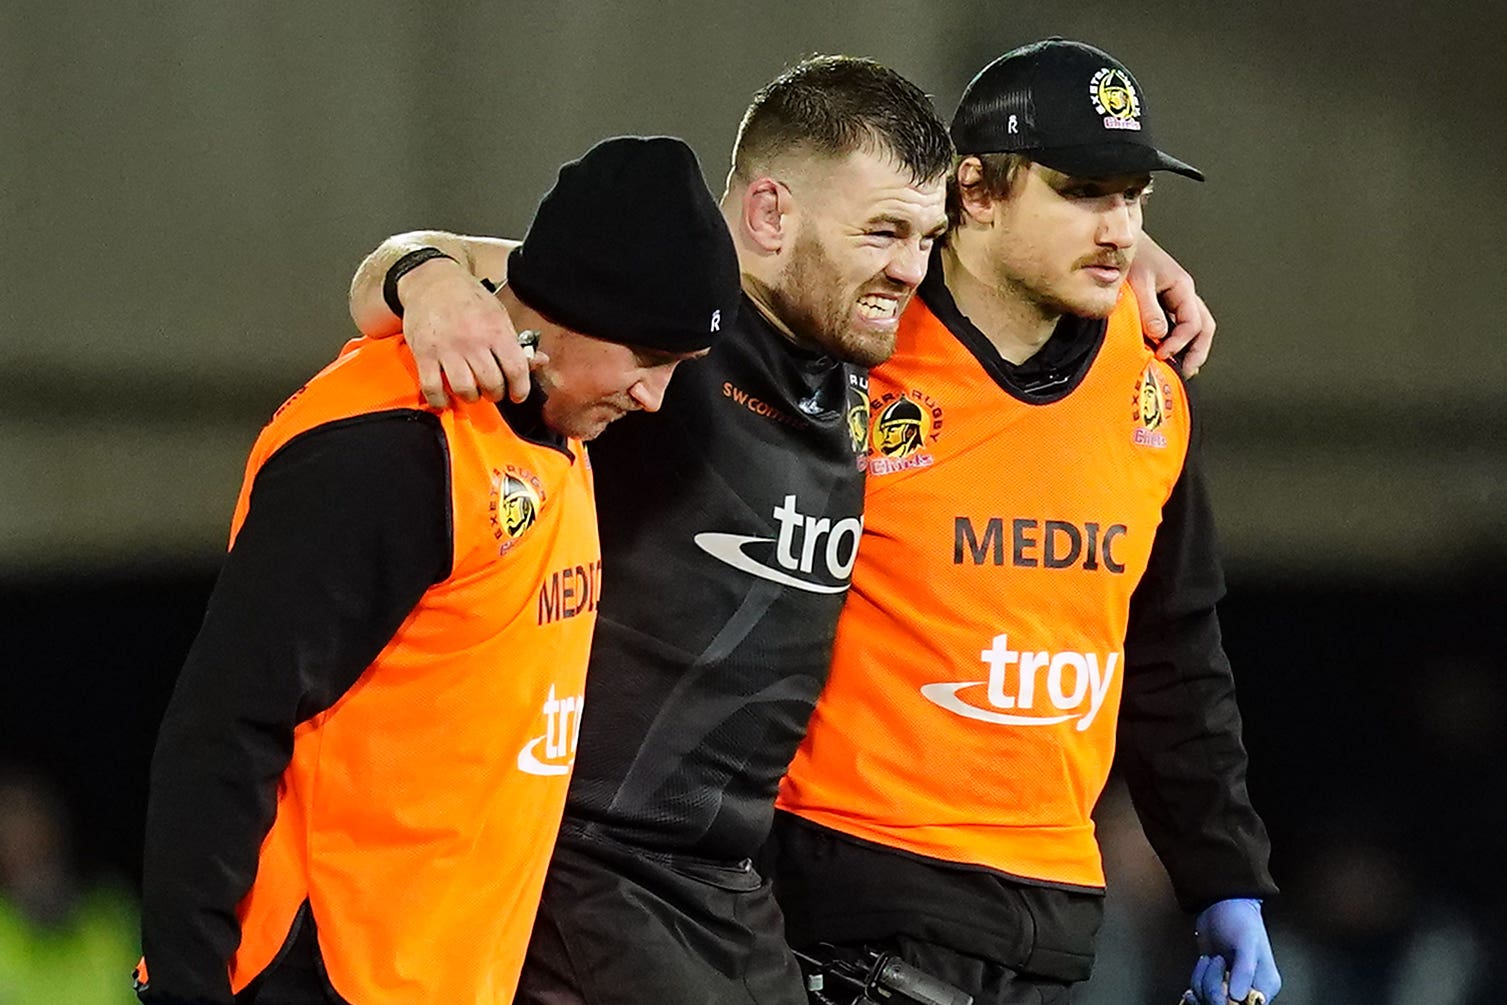 Luke Cowan-Dickie has suffered an ankle injury that could require surgery (David Davies/PA)